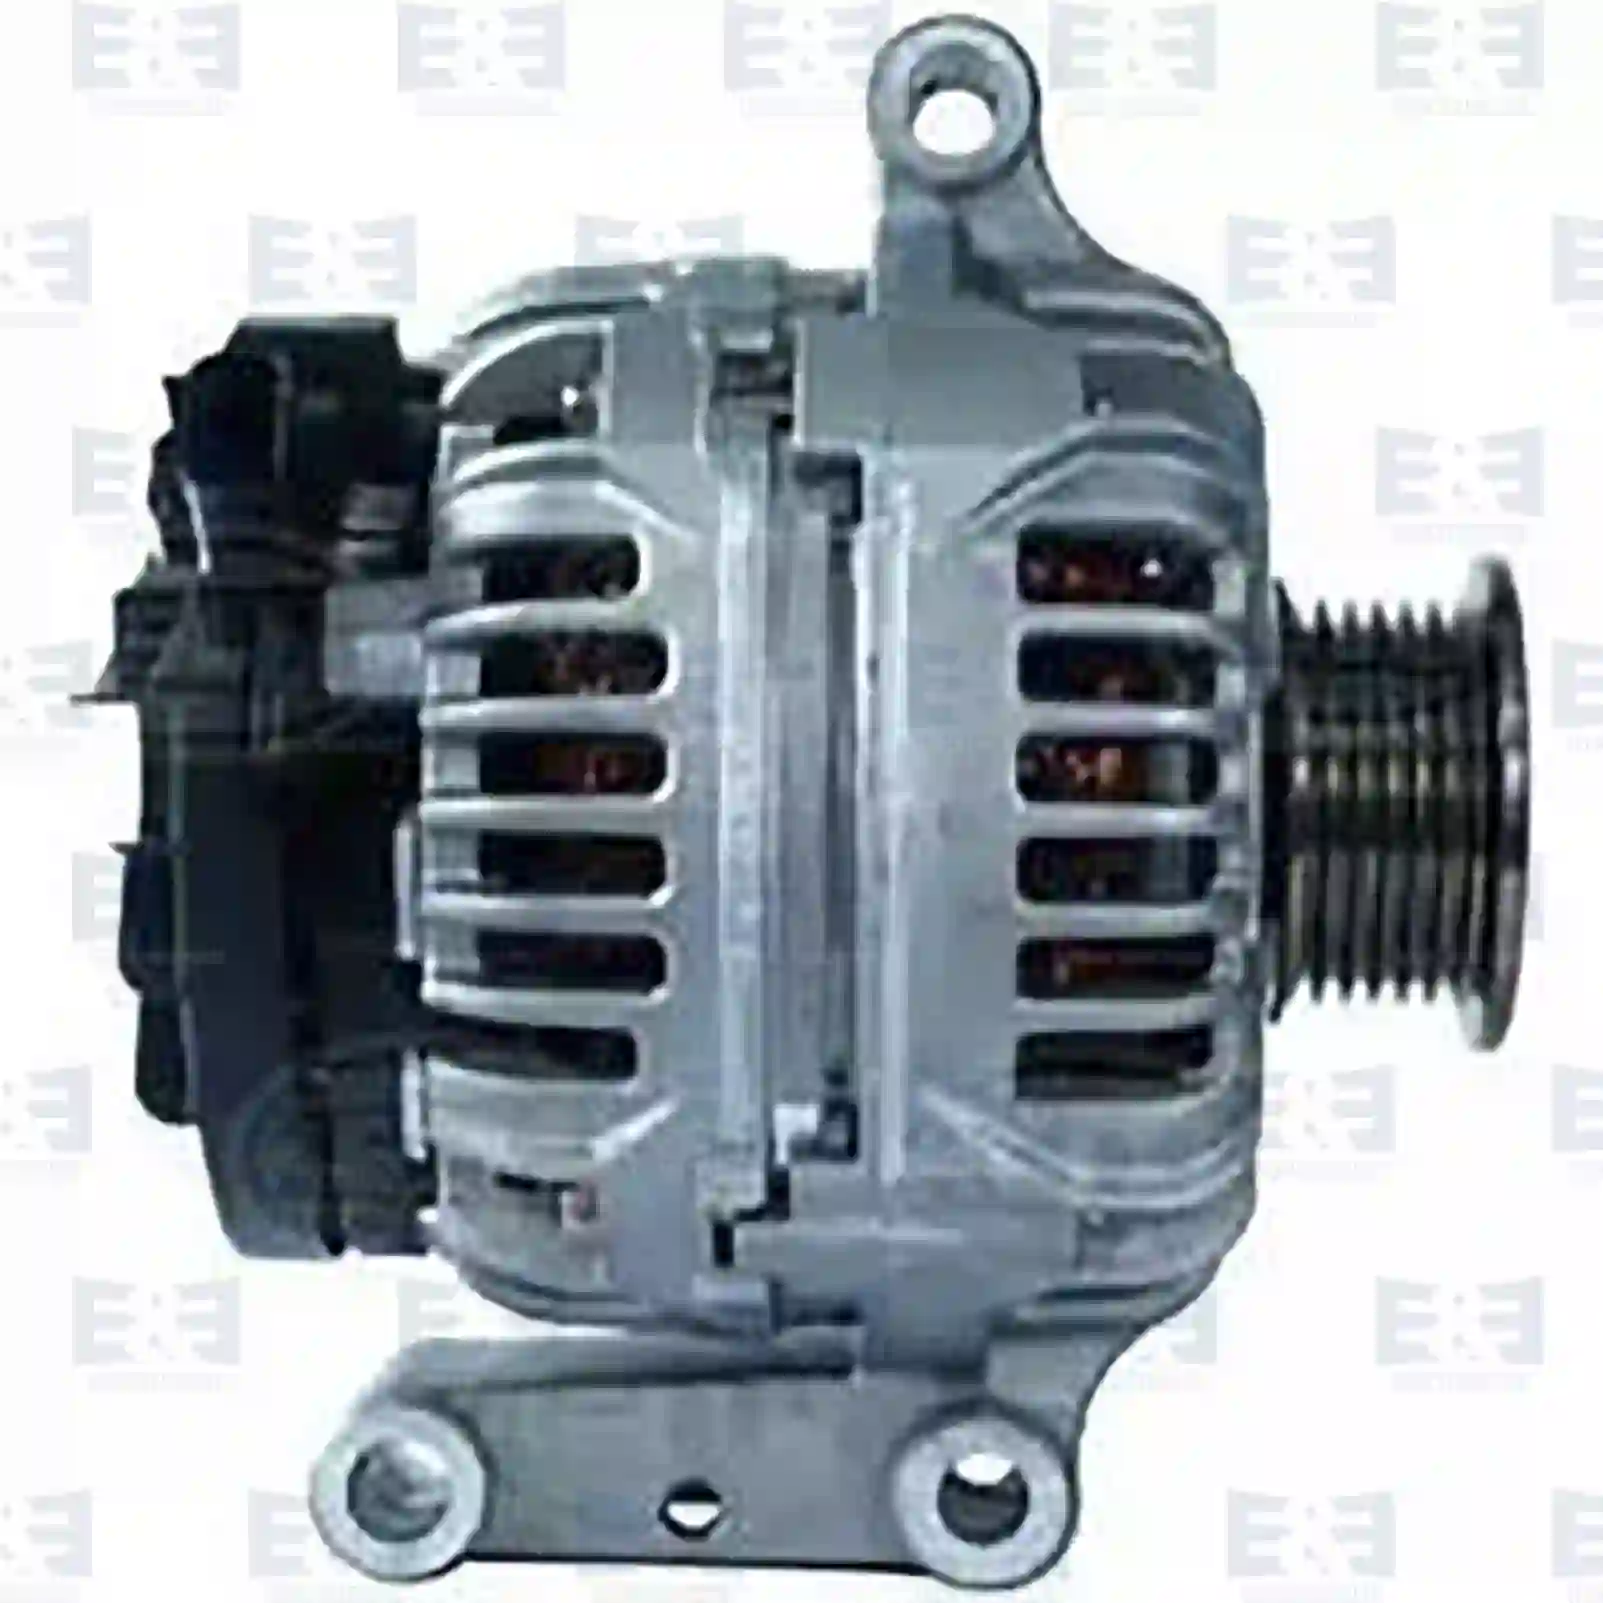 Alternator, 2E2299875, 1516507, 1450633, 1C1T-10300-AD, 1C1T-10300-AE, 1C1T-10300-AF, 4112235, 4371030, 4392207, 4407889, R1C1T-10300-AF ||  2E2299875 E&E Truck Spare Parts | Truck Spare Parts, Auotomotive Spare Parts Alternator, 2E2299875, 1516507, 1450633, 1C1T-10300-AD, 1C1T-10300-AE, 1C1T-10300-AF, 4112235, 4371030, 4392207, 4407889, R1C1T-10300-AF ||  2E2299875 E&E Truck Spare Parts | Truck Spare Parts, Auotomotive Spare Parts